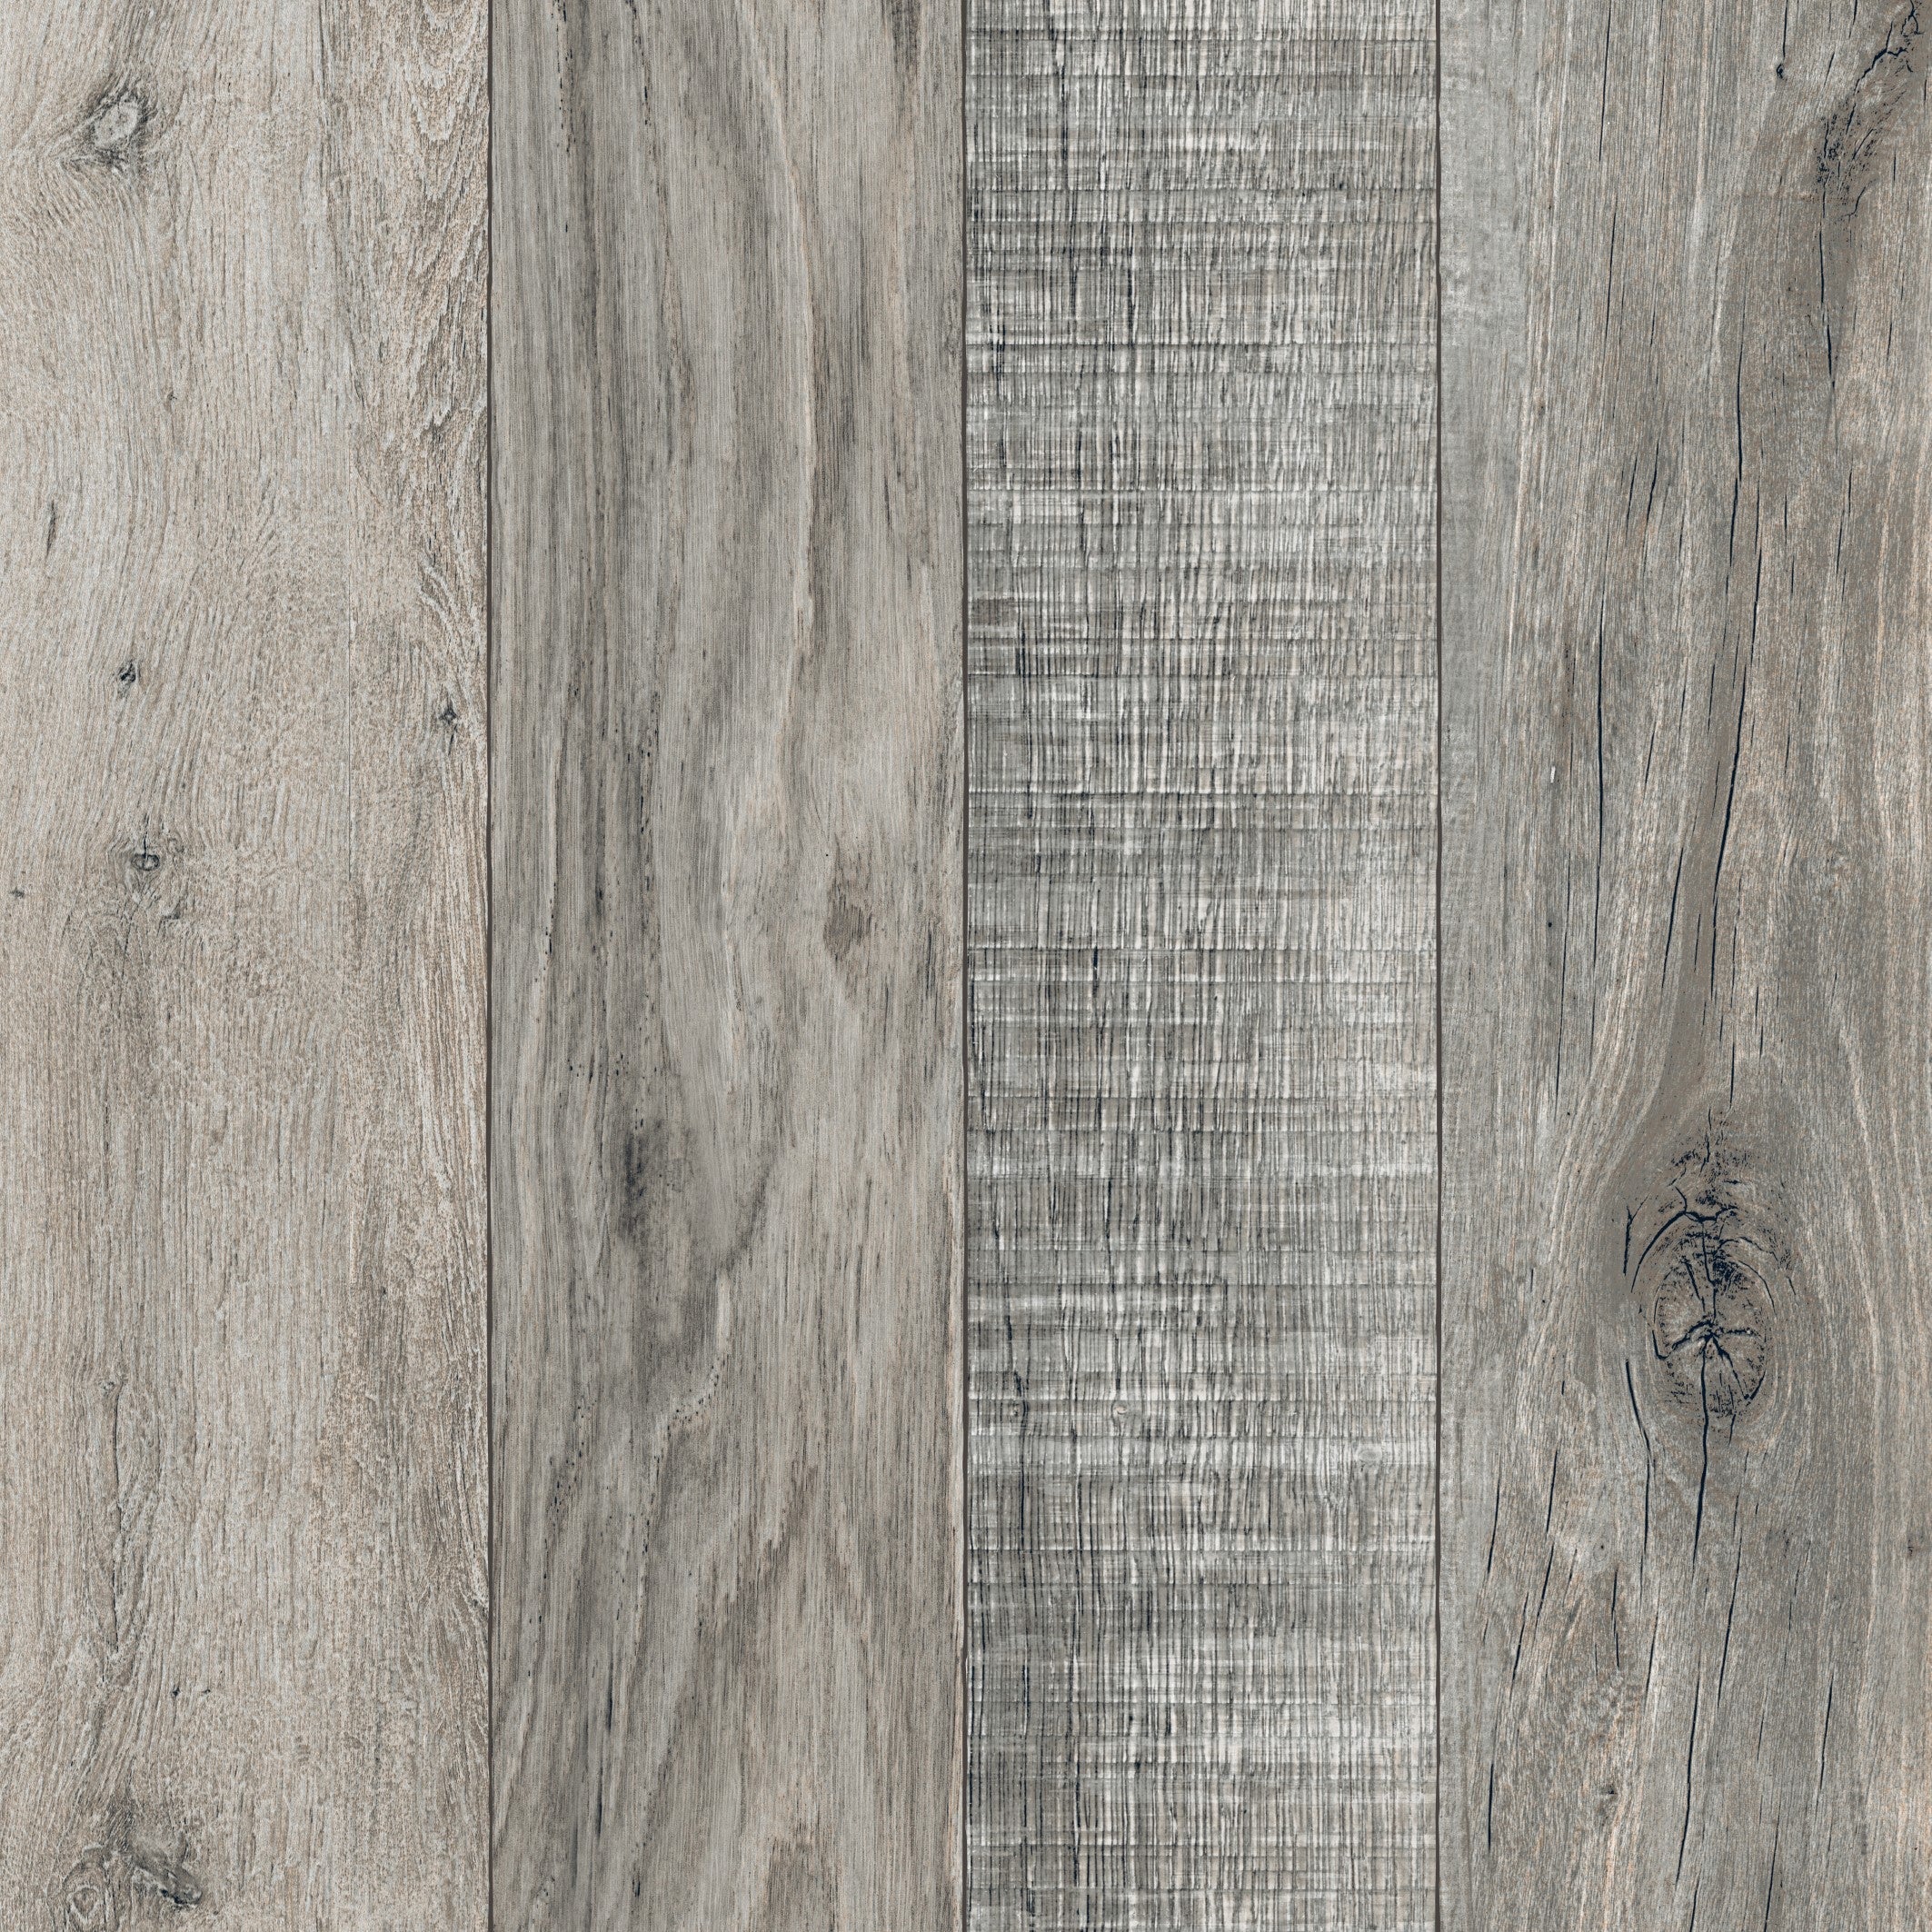 landmark frontier20 wood pepper paver tile 24x24x20mm matte rectified porcelain tile distributed by surface group international